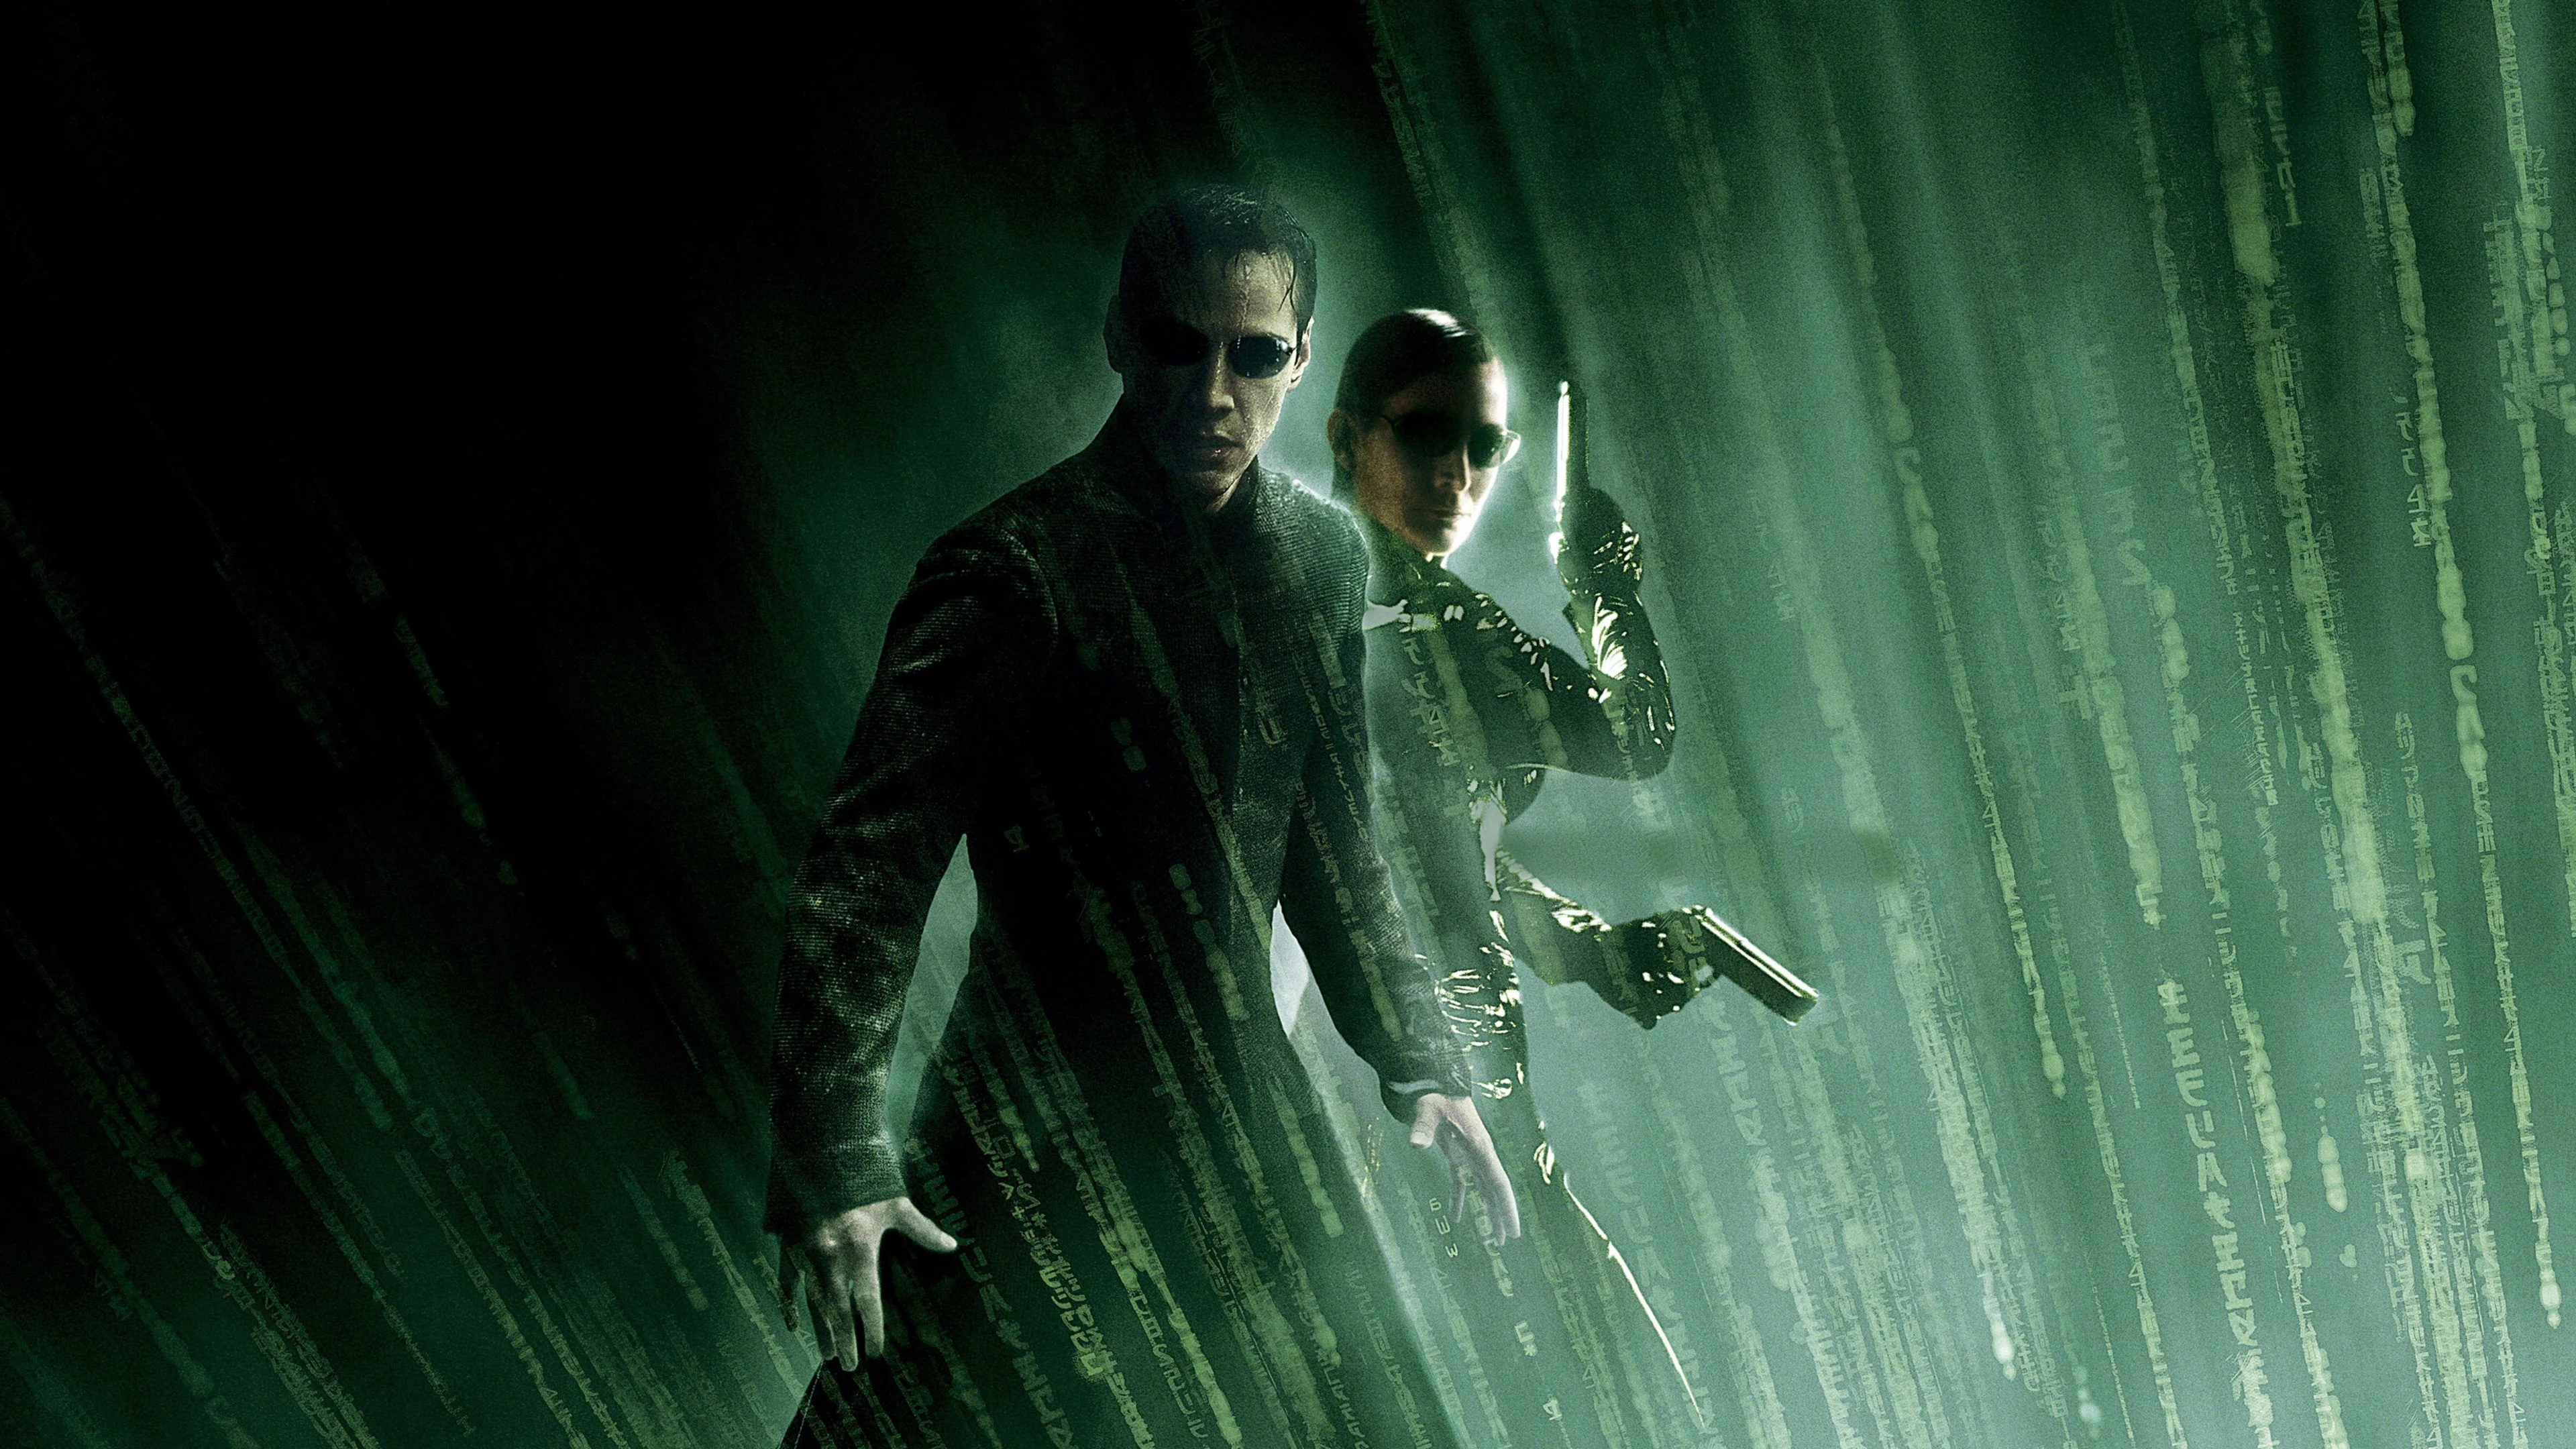 The Matrix: A 1999 science fiction action film written and directed by the Wachowskis. 3840x2160 4K Wallpaper.